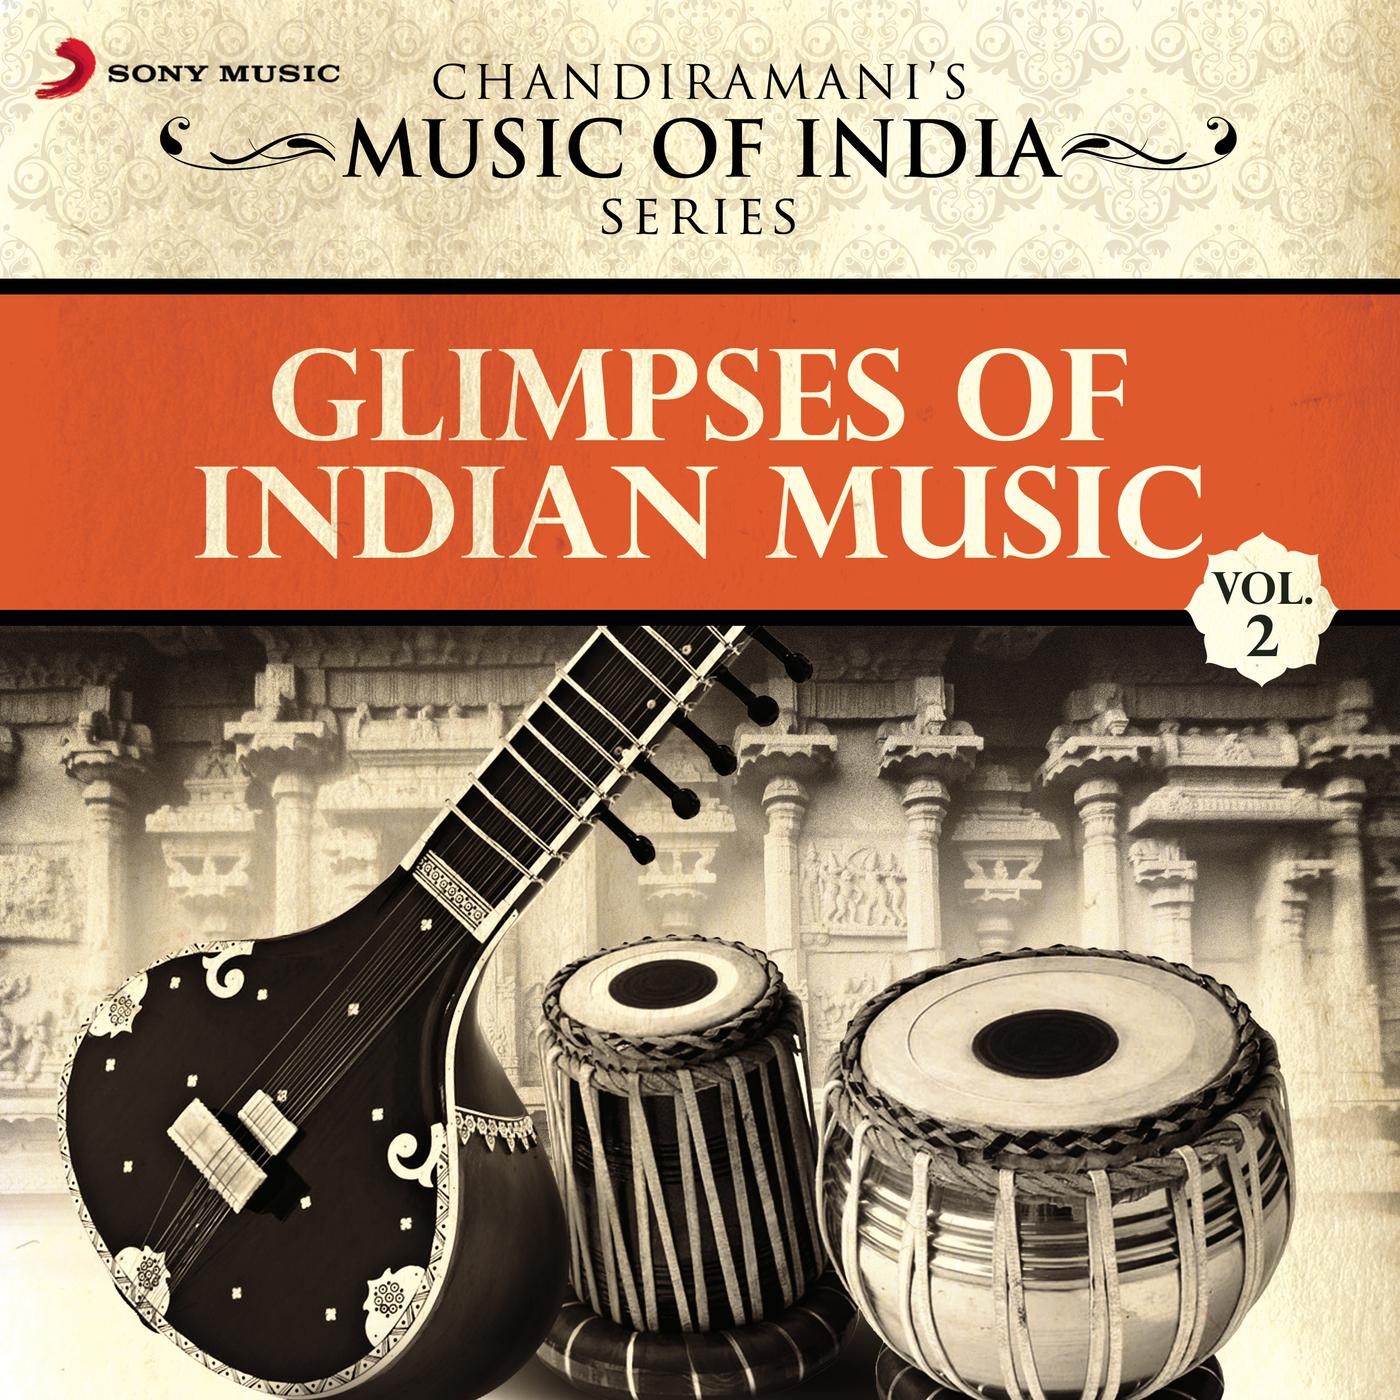 Glimpses of Indian Music, Vol. 2